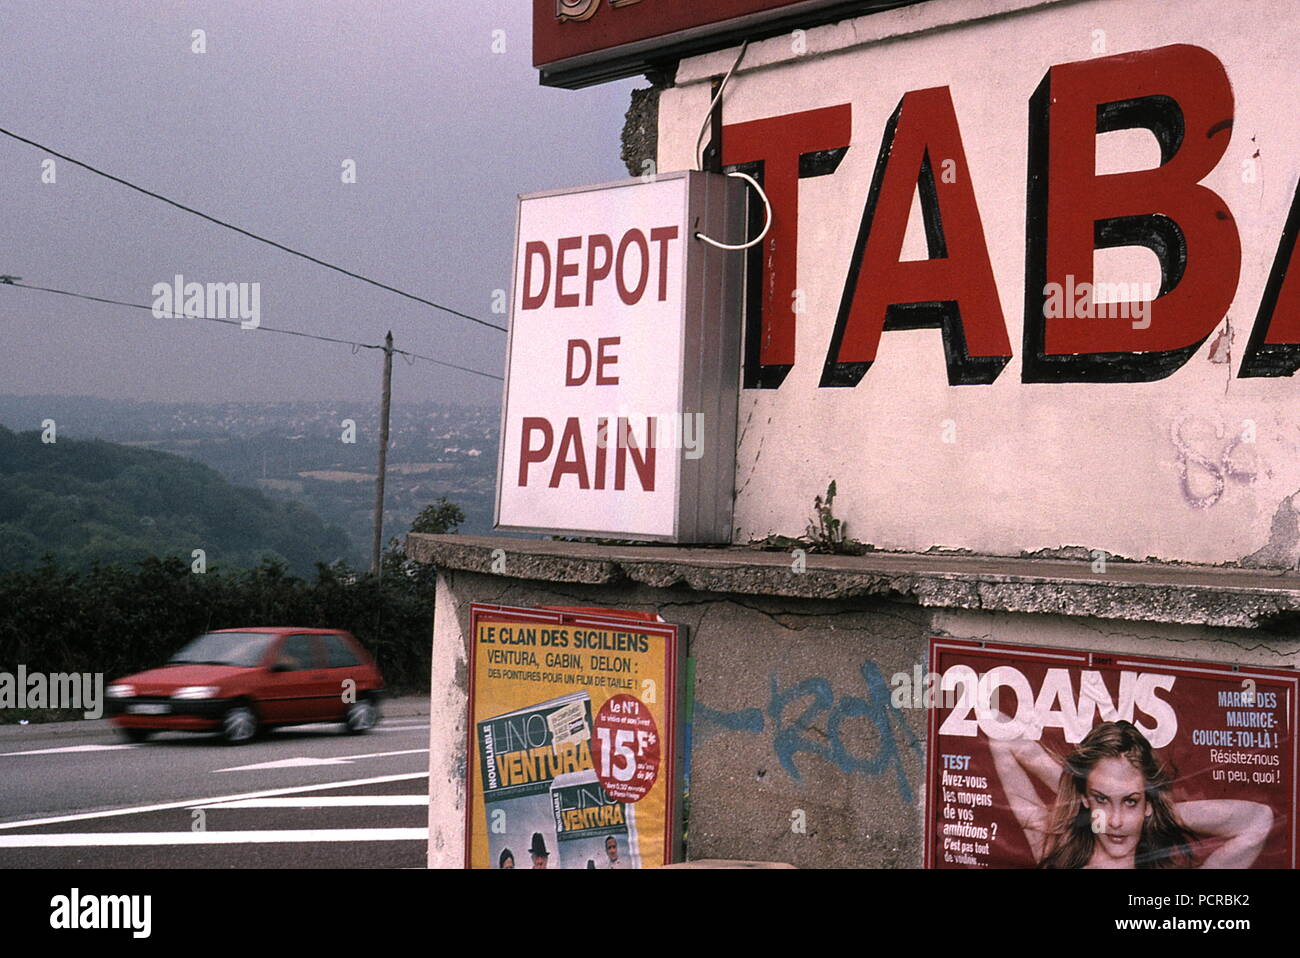 AJAXNETPHOTO. 1997. CHERBOURG, FRANCE. - DEPOT DE PAIN - BREADSHOP ADVERT ON WALL ADJACENT NEWSAGENT SHOP SELLING TOBACCO AND BREAD ON N2013 NEAR CHERBOURG - SITE BUSINESS STATUS SINCE CHANGED, SHOP AND ADVERTS NO LONGER EXIST. PHOTO:JONATHAN EASTLAND/AJAX REF:970890 Stock Photo